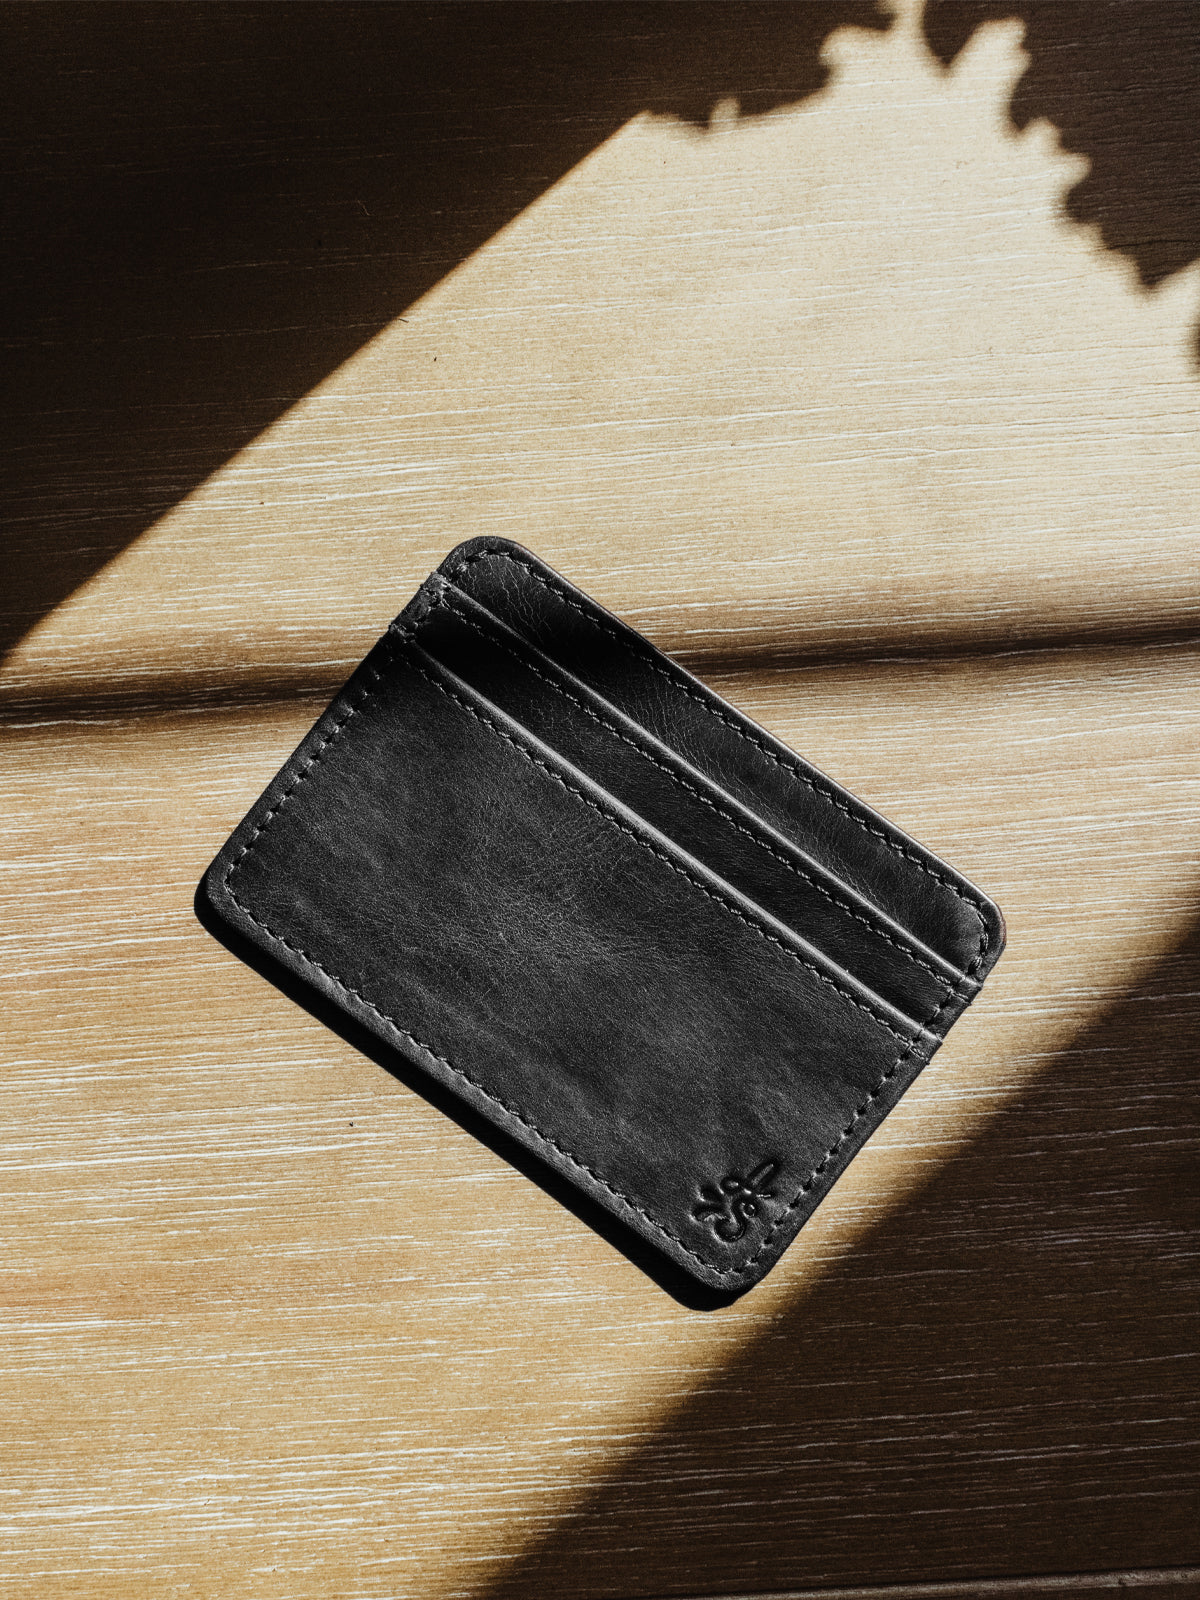 Black minimalistic wallet with large logo on back. Product is on a wood surface.